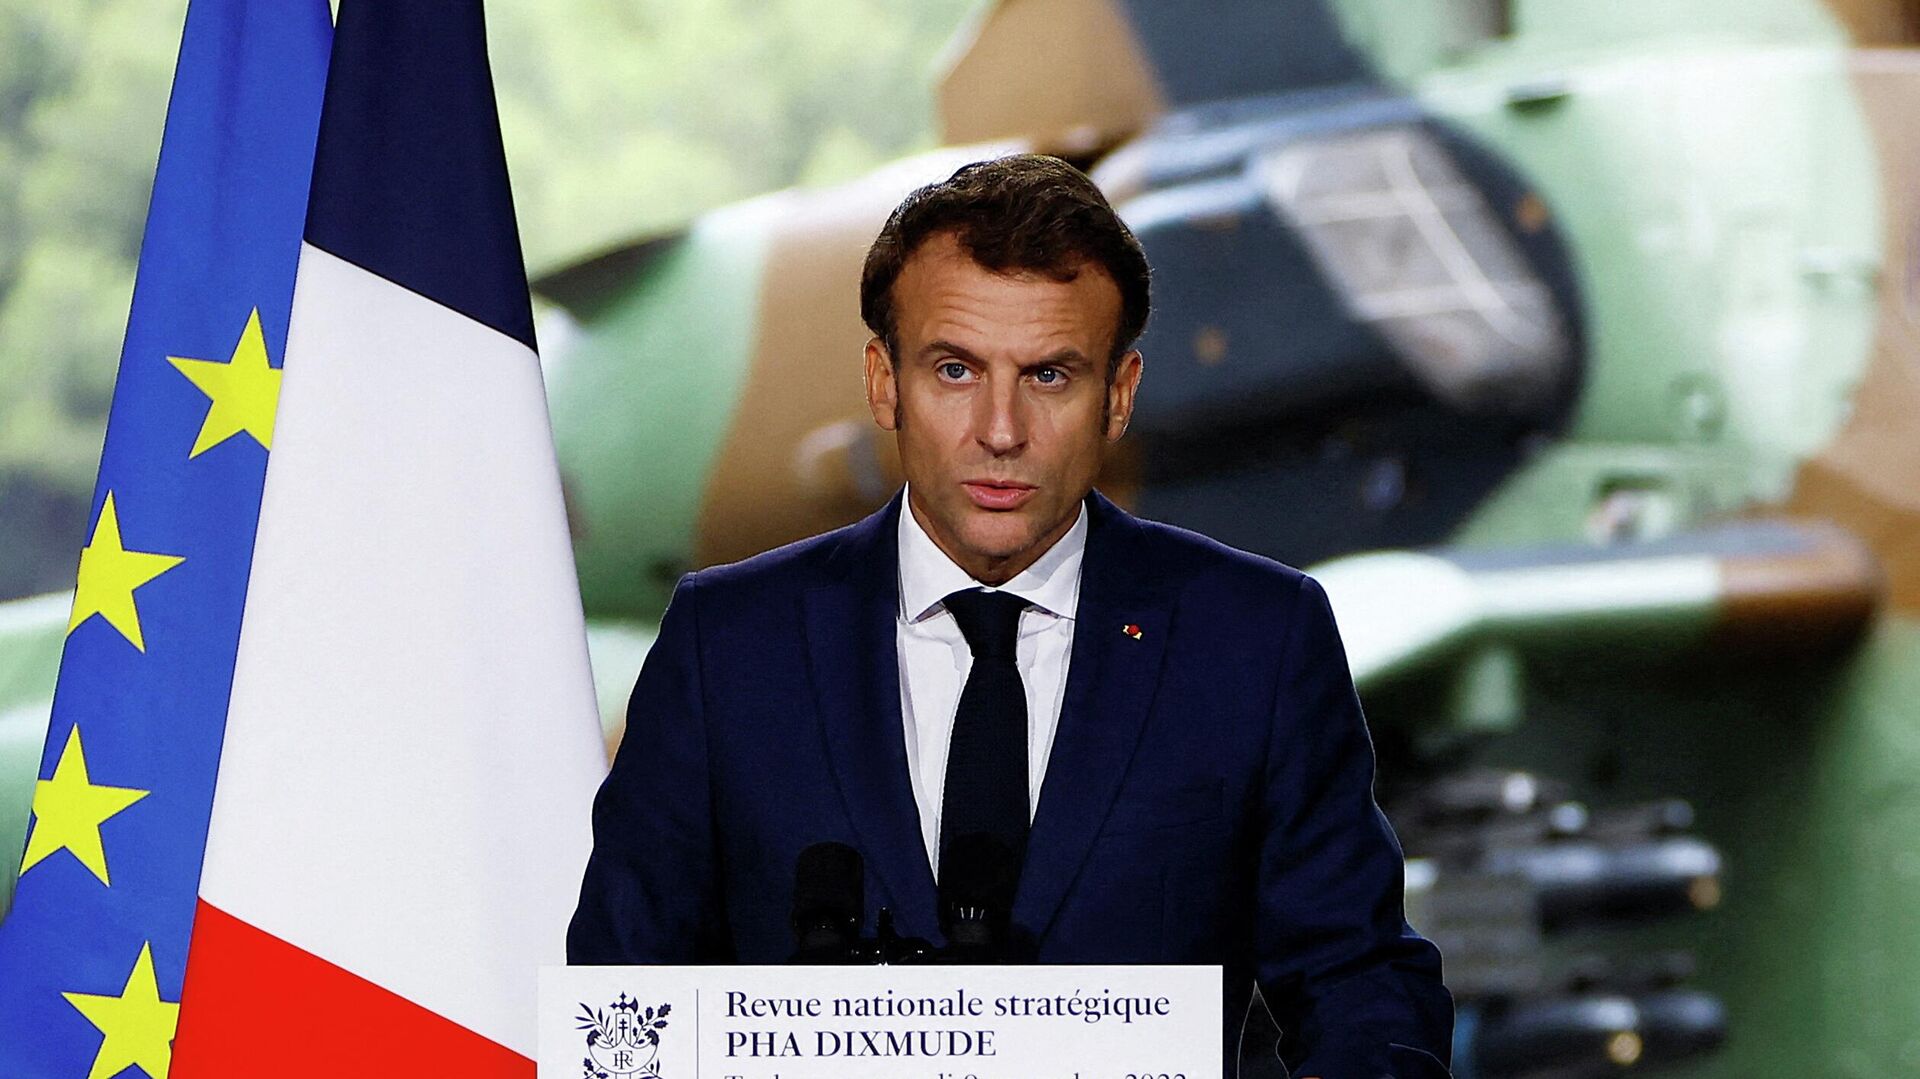 France's President Emmanuel Macron delivers a speech on defence strategy to present the La Revue nationale strategique (RNS), a new military programming law (2024-2030), on the amphibious helicopter carrier Dixmude docked in the French Navy base of Toulon, Southern France on November 9, 2022. - Emmanuel Macron is on a one-day visit to present the major strategic challenges that France must face, in a global geopolitical grammar disrupted by the war in Ukraine. - Sputnik International, 1920, 09.11.2022